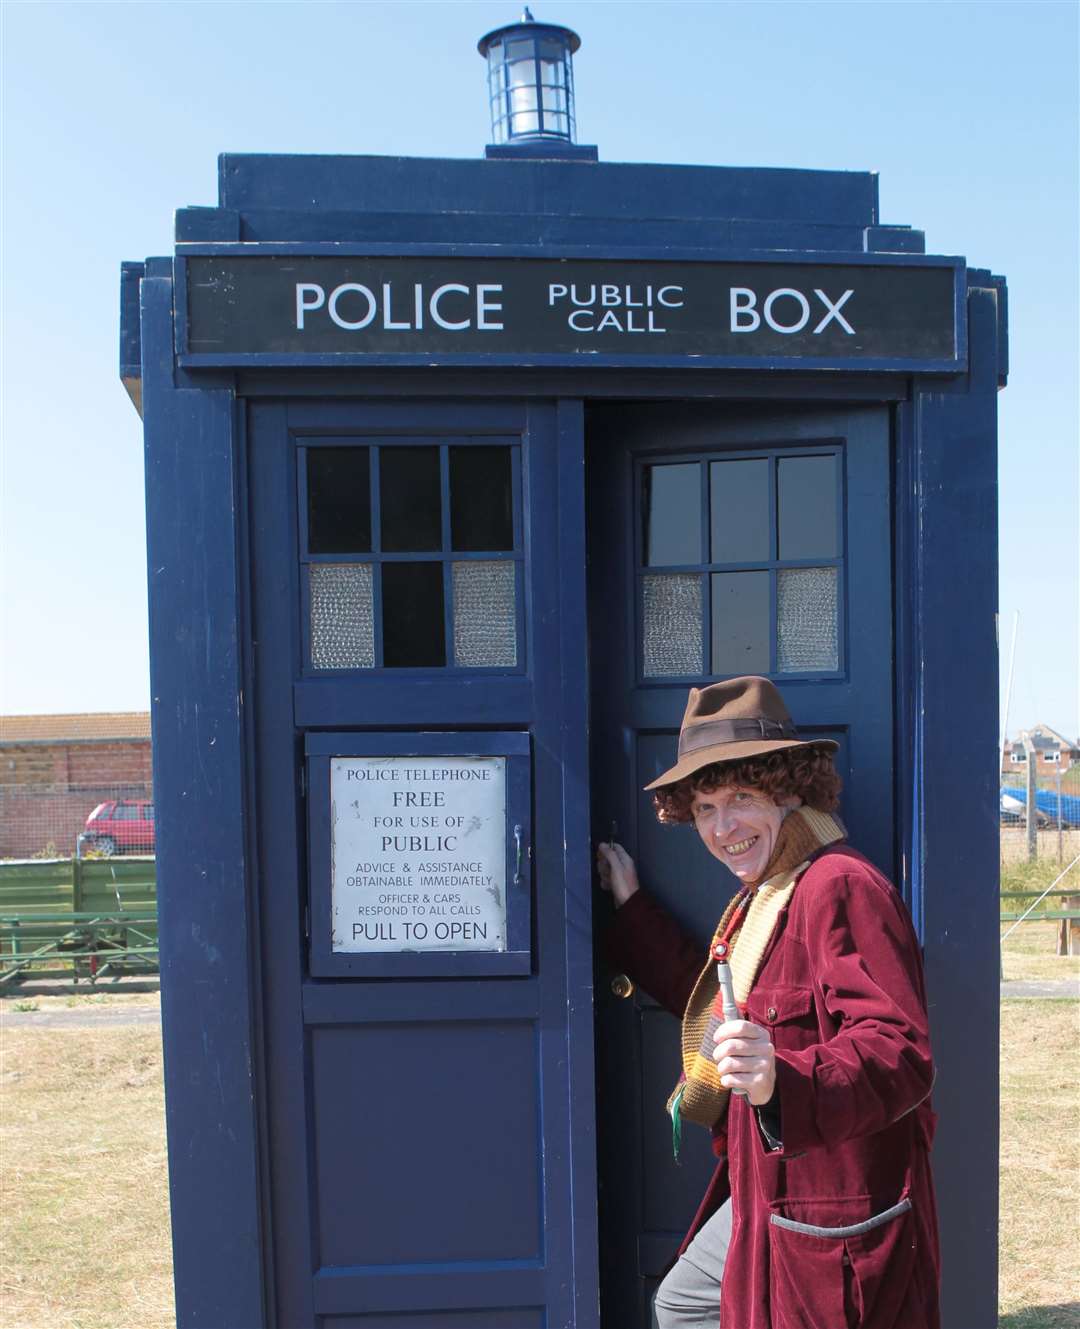 Stuart Grant, as Dr Who performs at Sheppey Sci-Fi festival held at Barton's Point. Picture by: John Westhrop